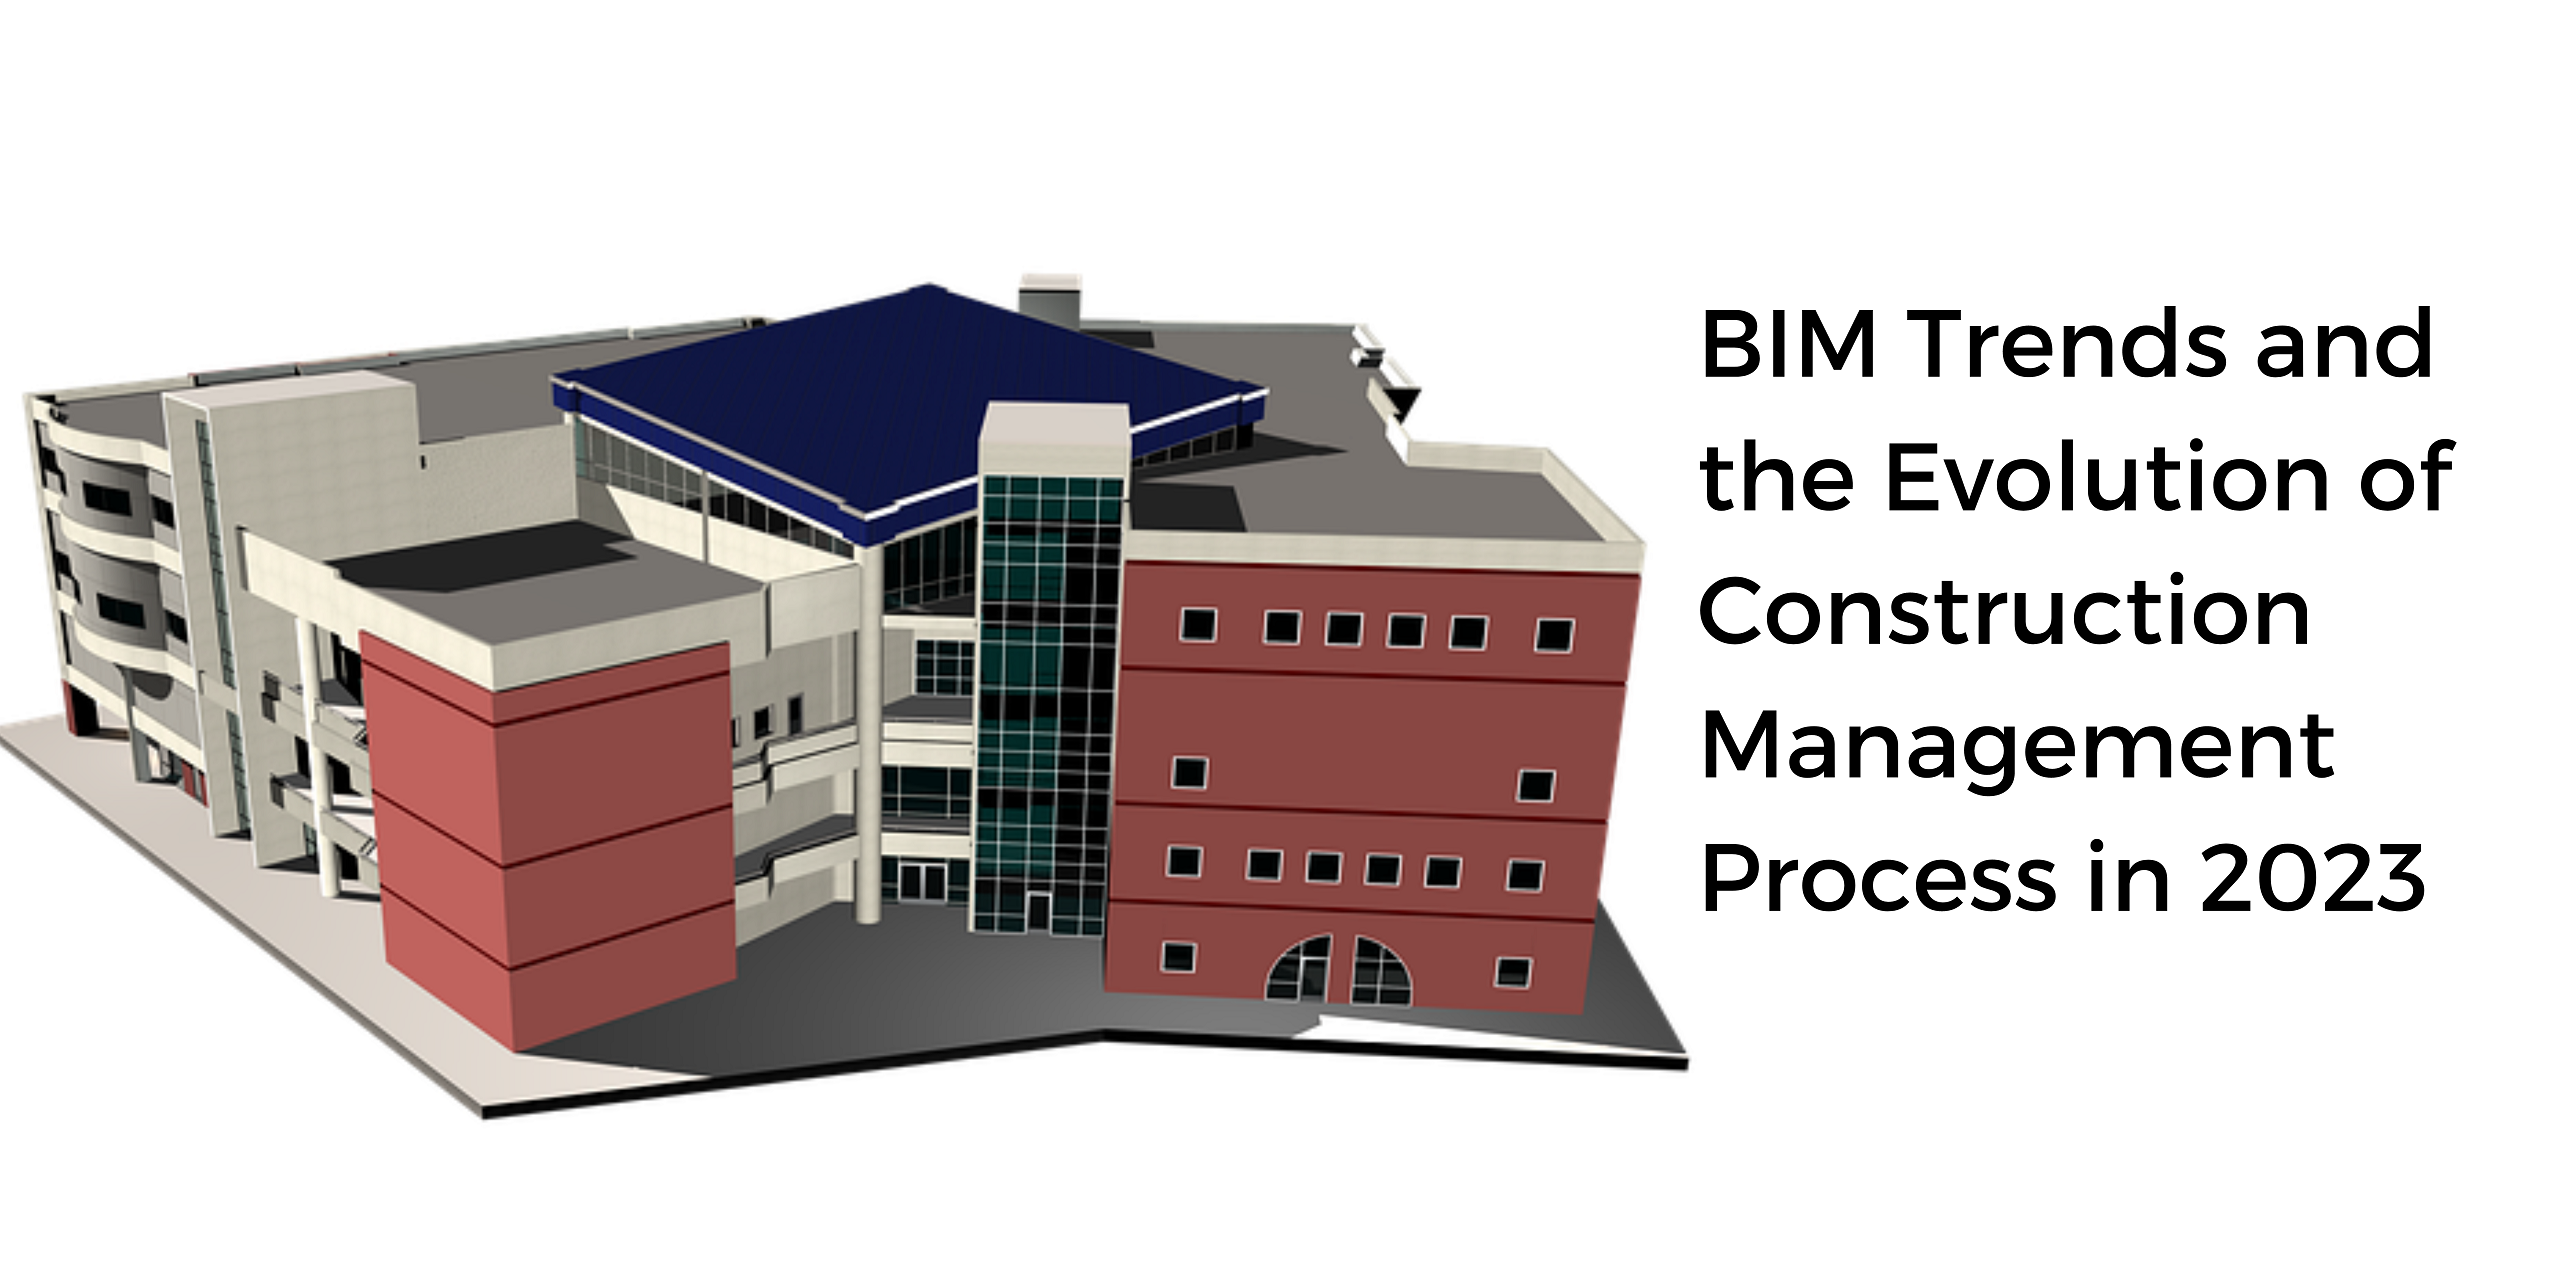 bim trends and the evolution of construction management process in 2023